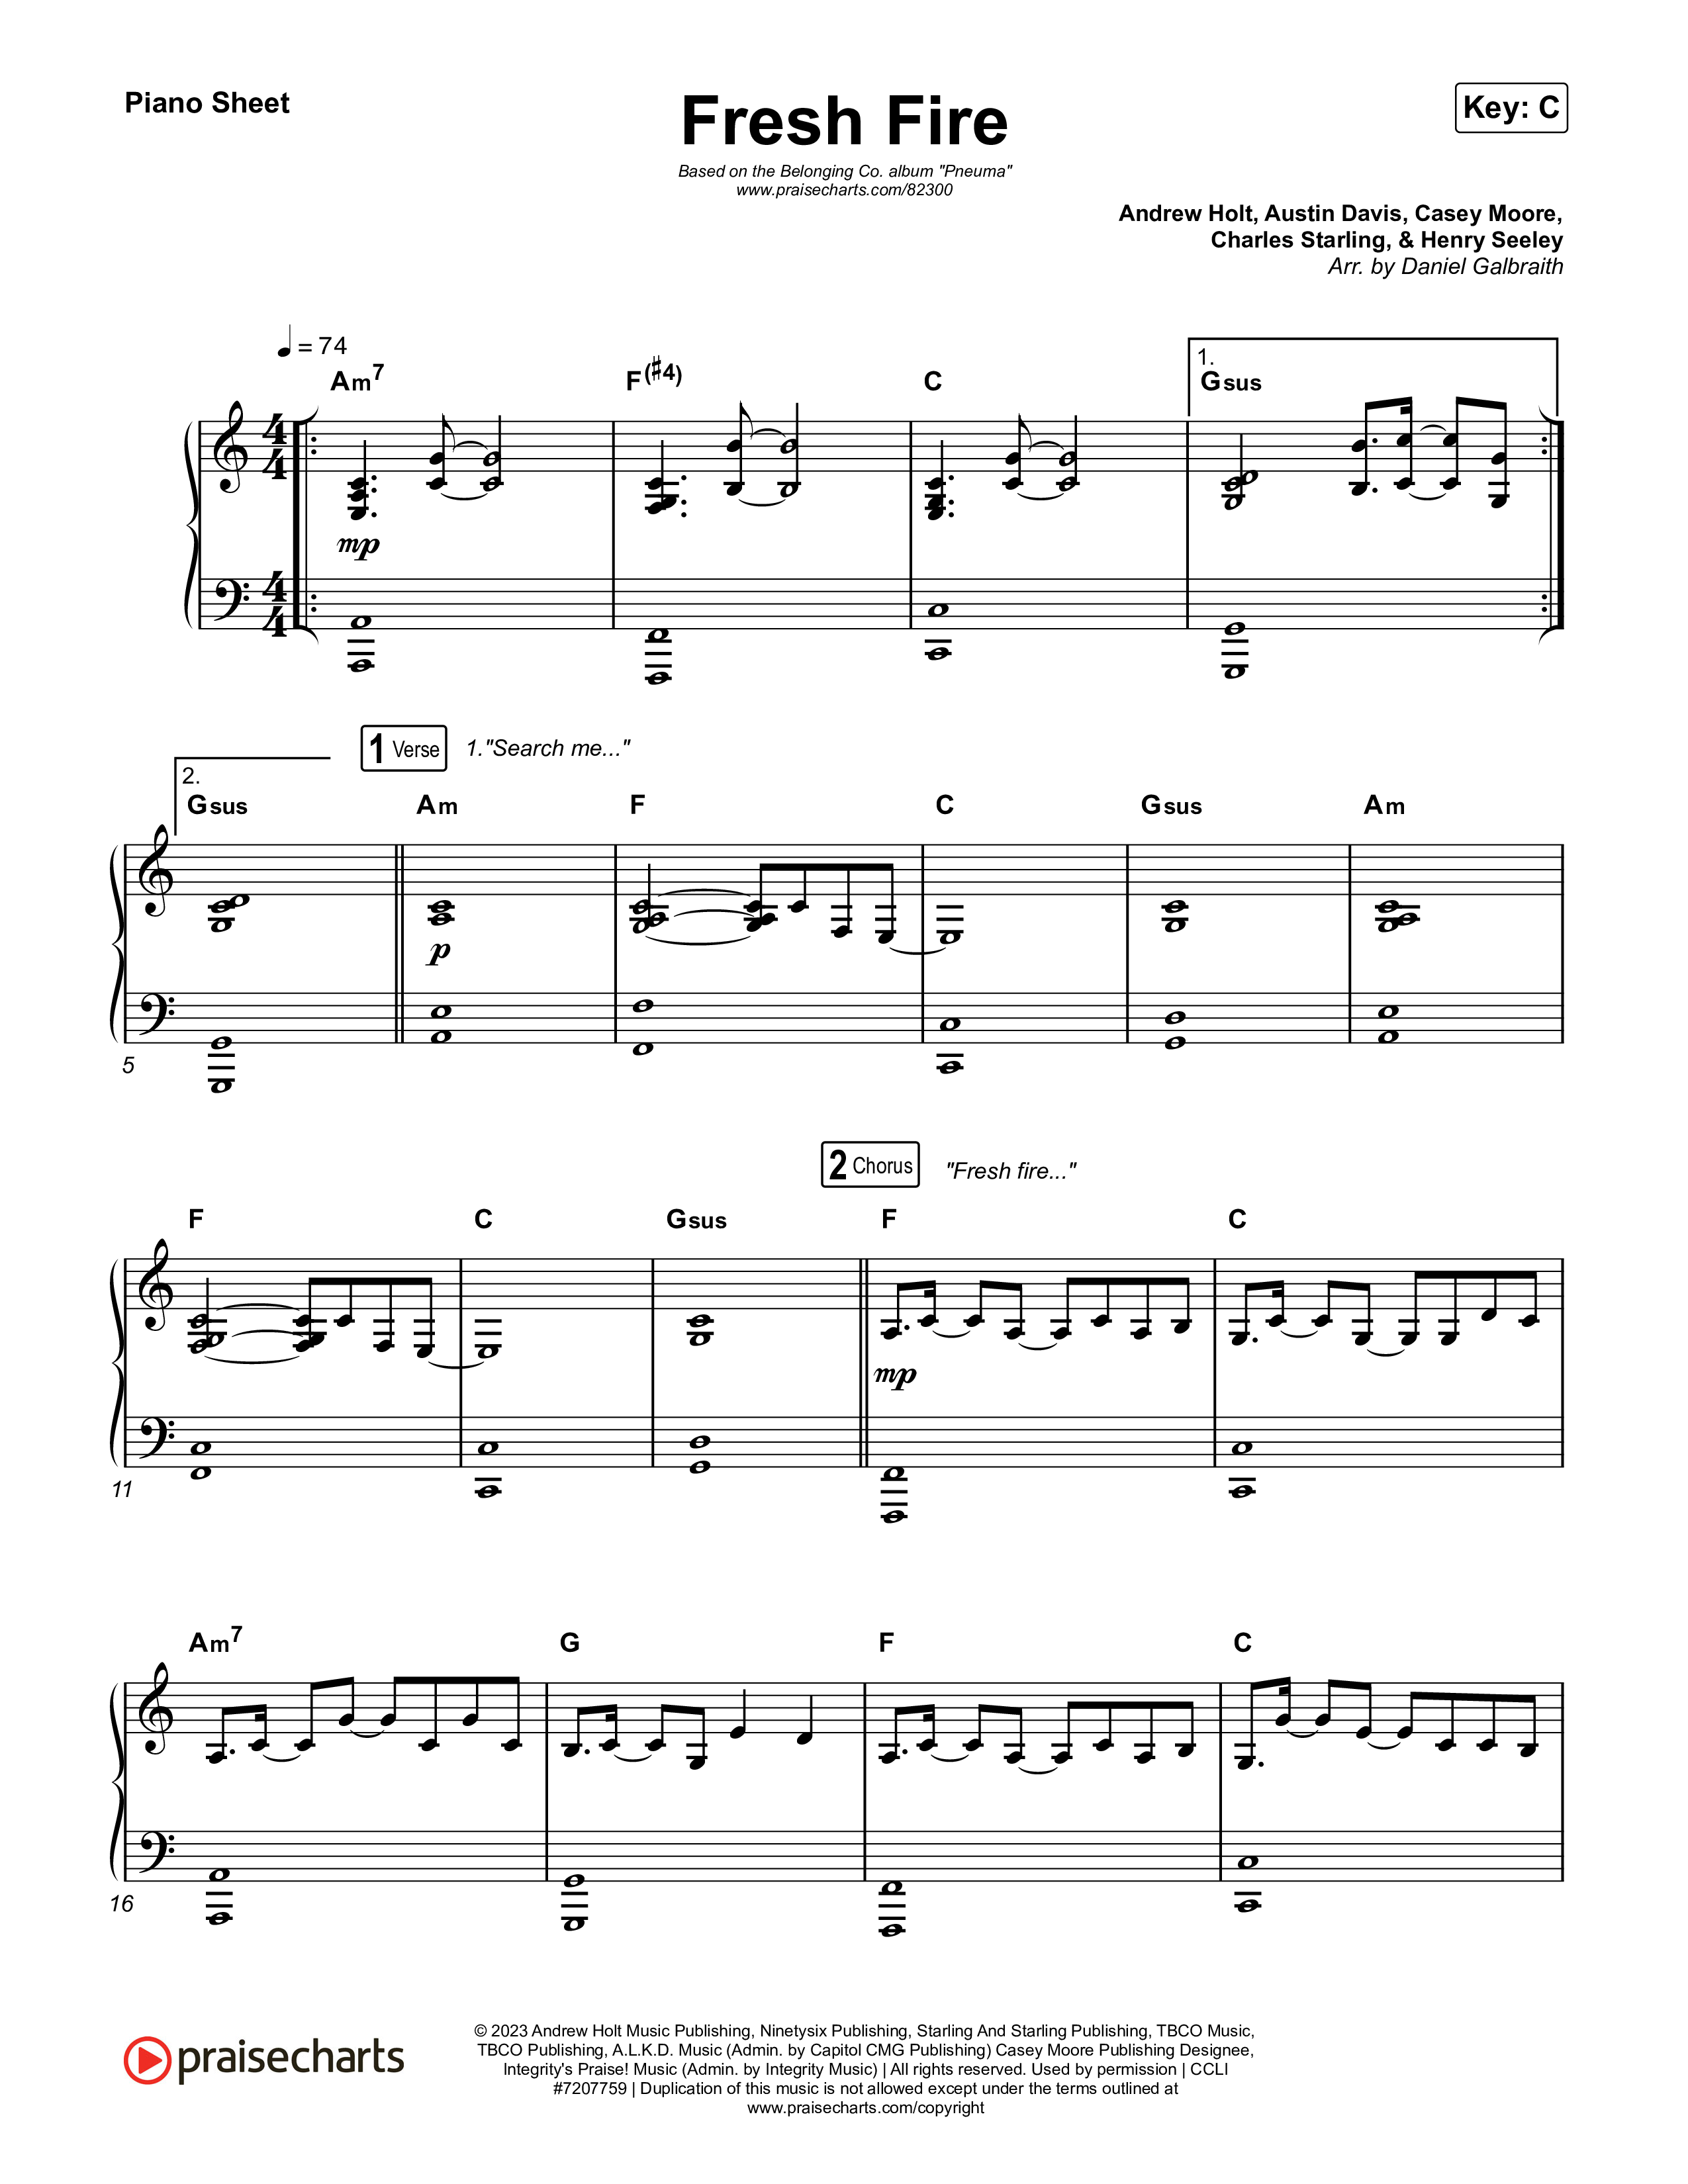 Fresh Fire (Live) Piano Sheet (The Belonging Co / Andrew Holt)